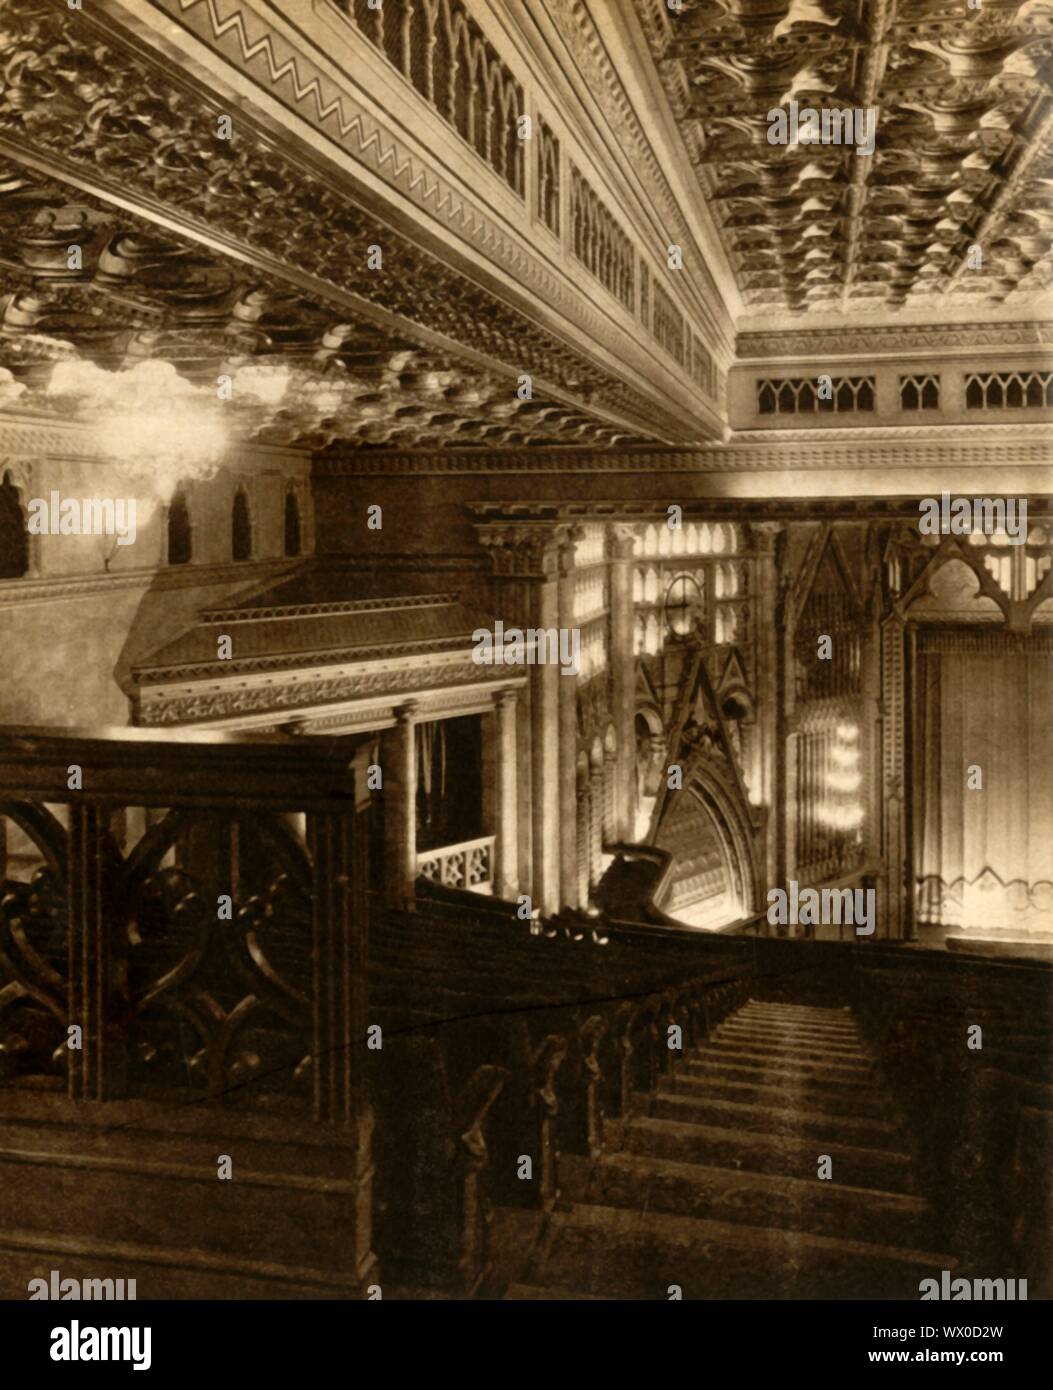 The Granada cinema, Tooting, London, 1931, (1933). The Granada, Tooting: 'modelled on the Spanish-Moorish architecture of the city from which it took its name.' Interior of the newly-opened cinema, built in luxurious Art Deco style, which was later granted Grade I Listed status. It is considered by many to be the most spectacular cinema in Britain. From &quot;The Pageant of the Century&quot;. [Odhams Press Ltd, 1933] Stock Photo